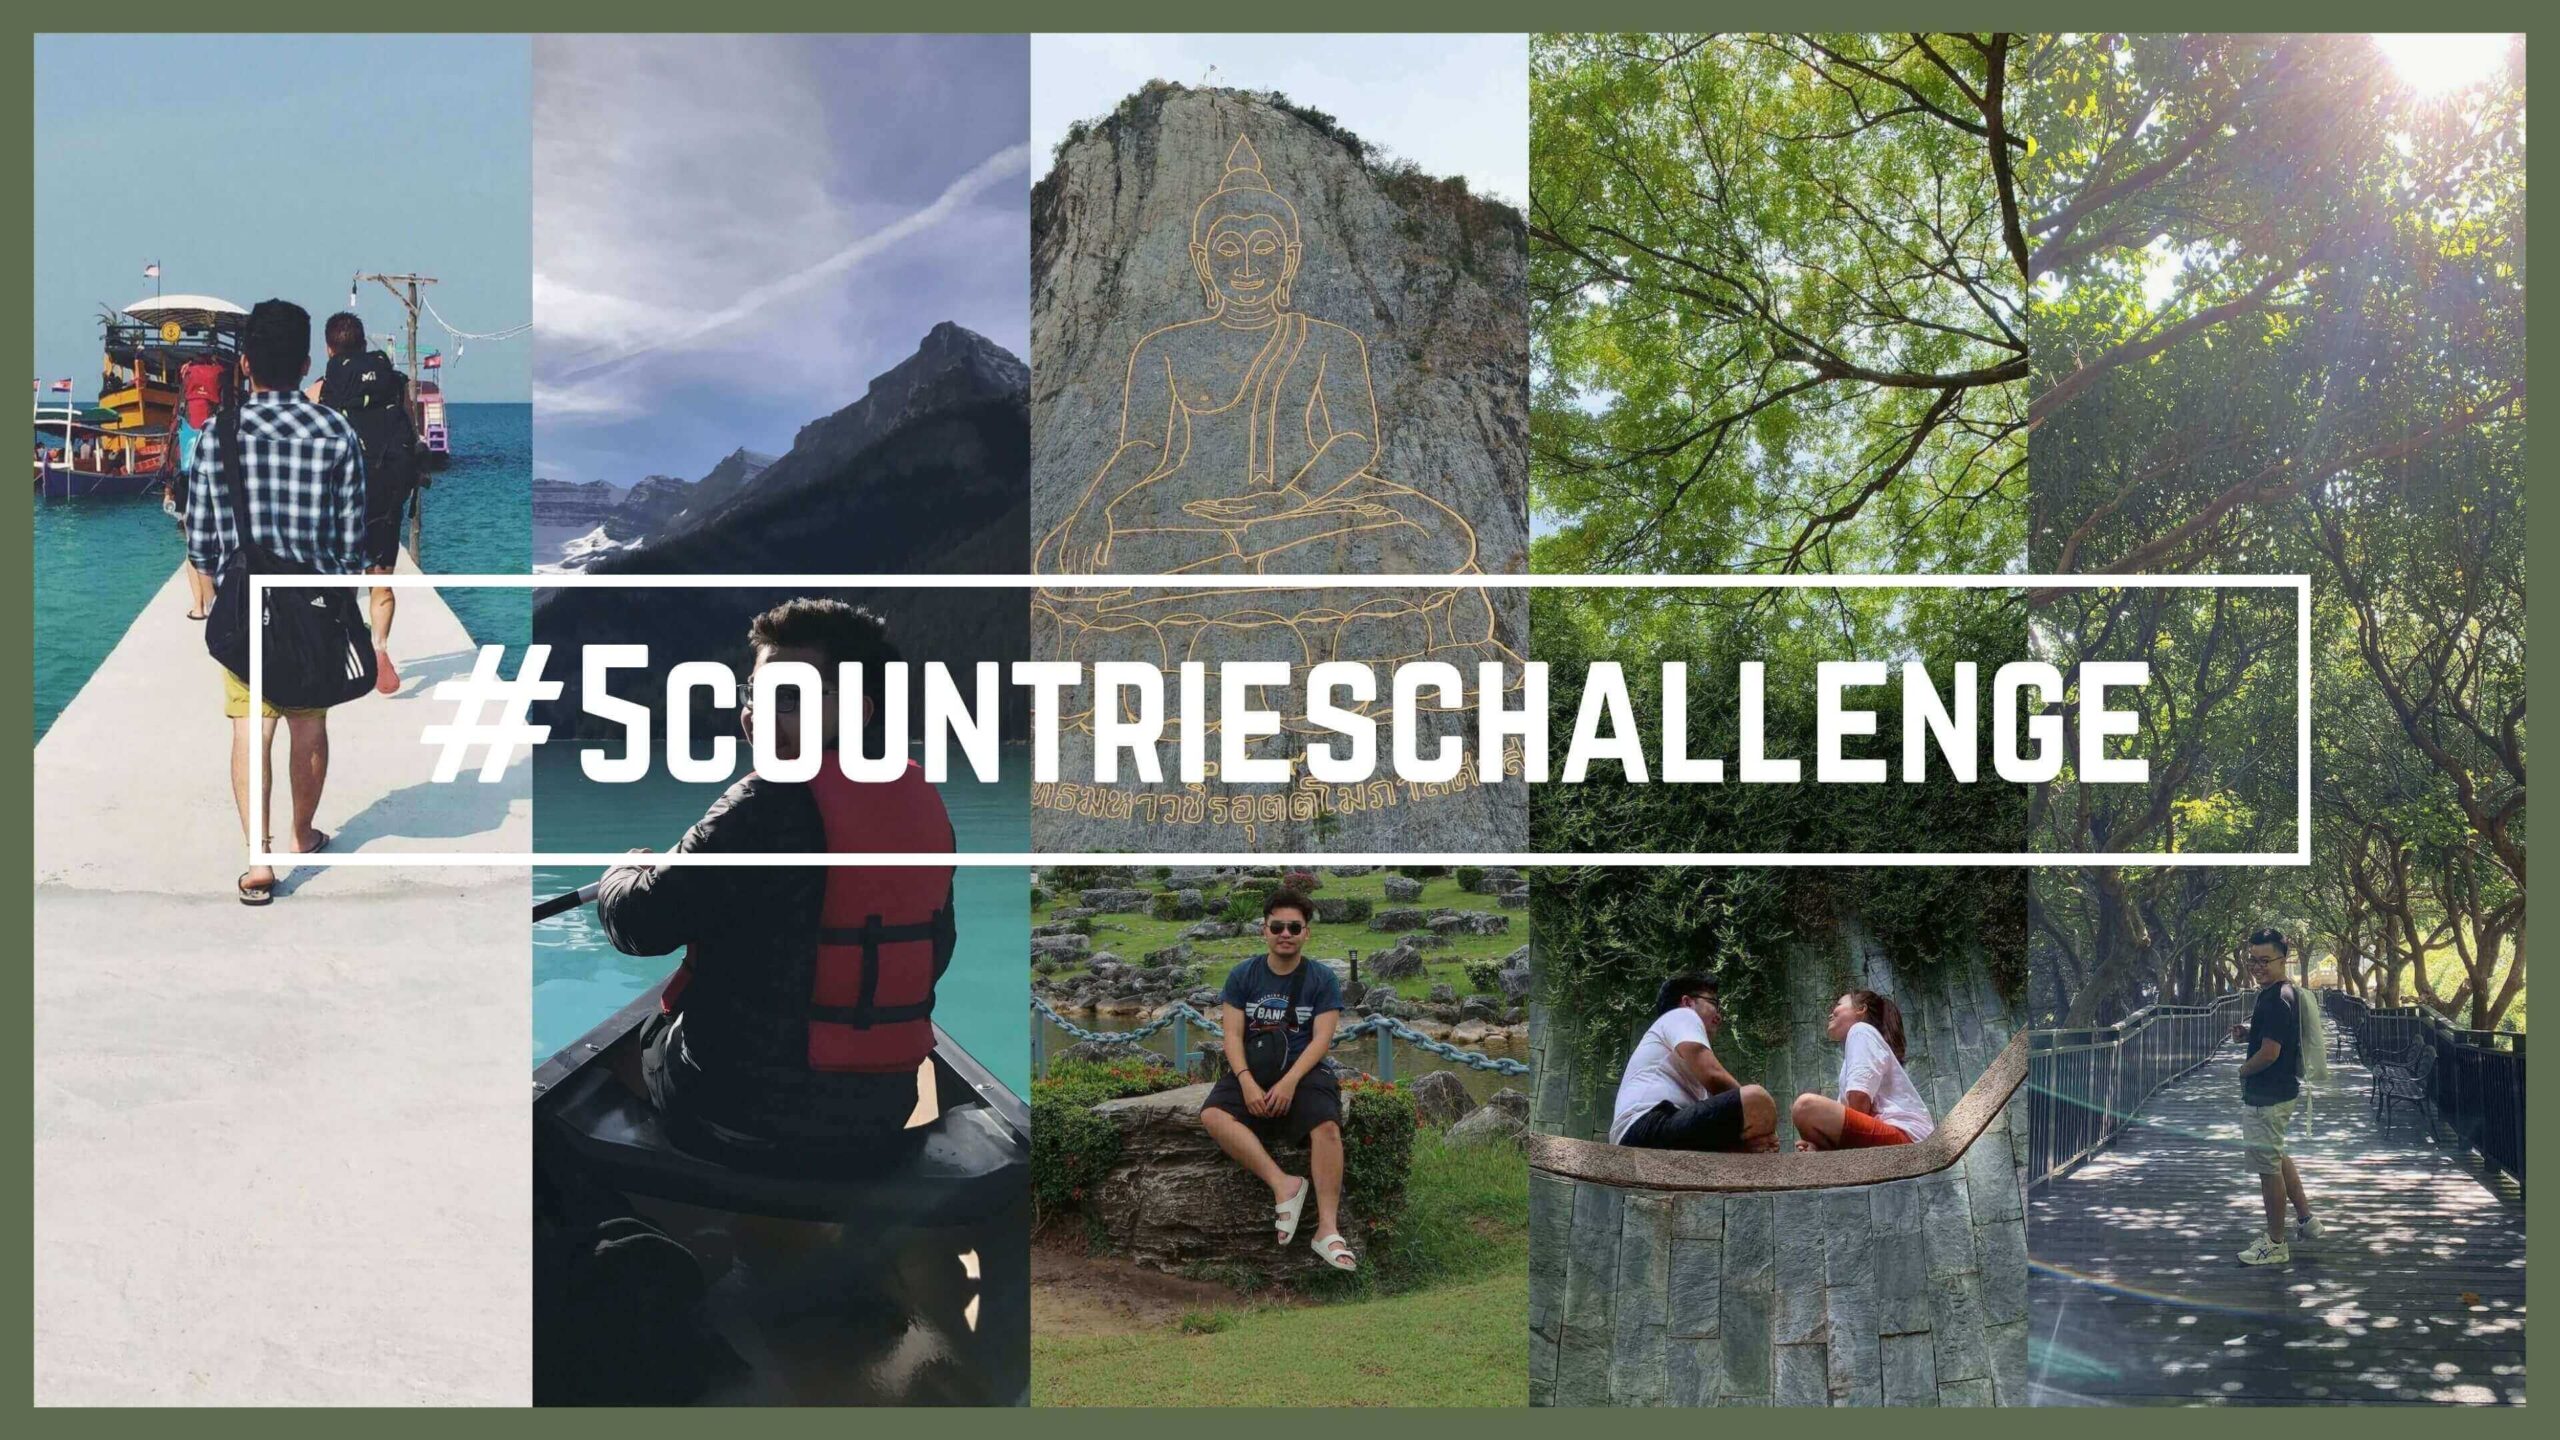 Let’s Do 5 Countries Challenge – #5countrieschallenge